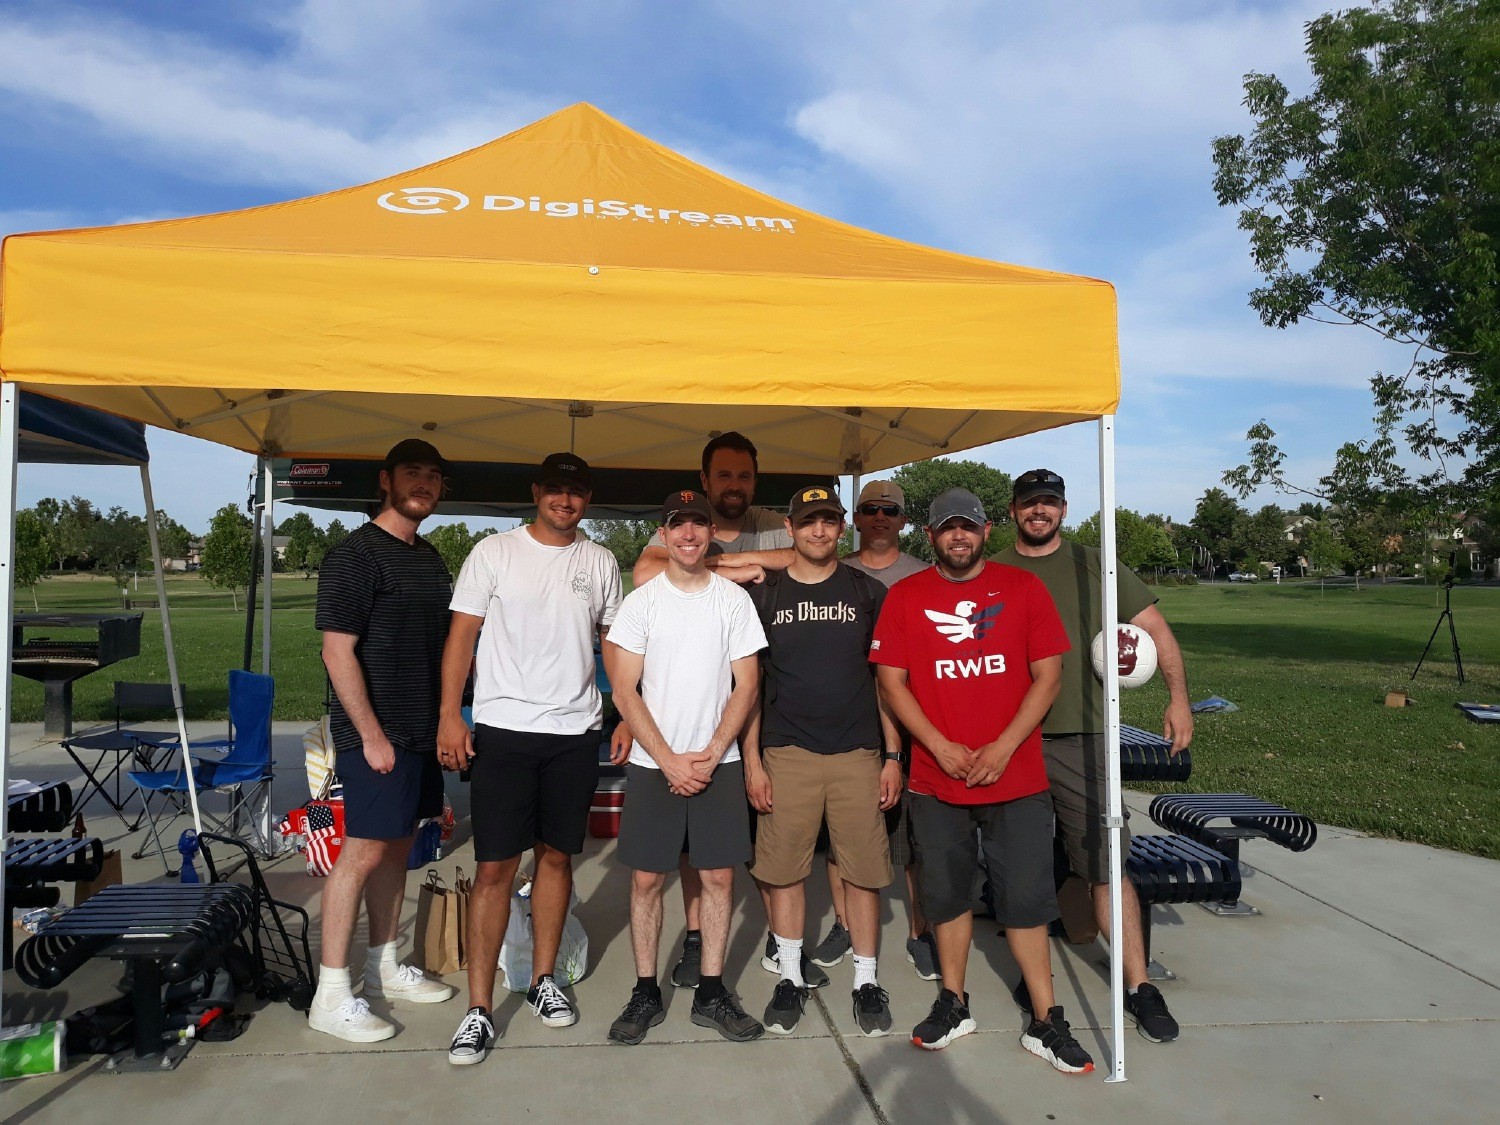 Digistream Central Valley hosted their annual team building and BBQ event.